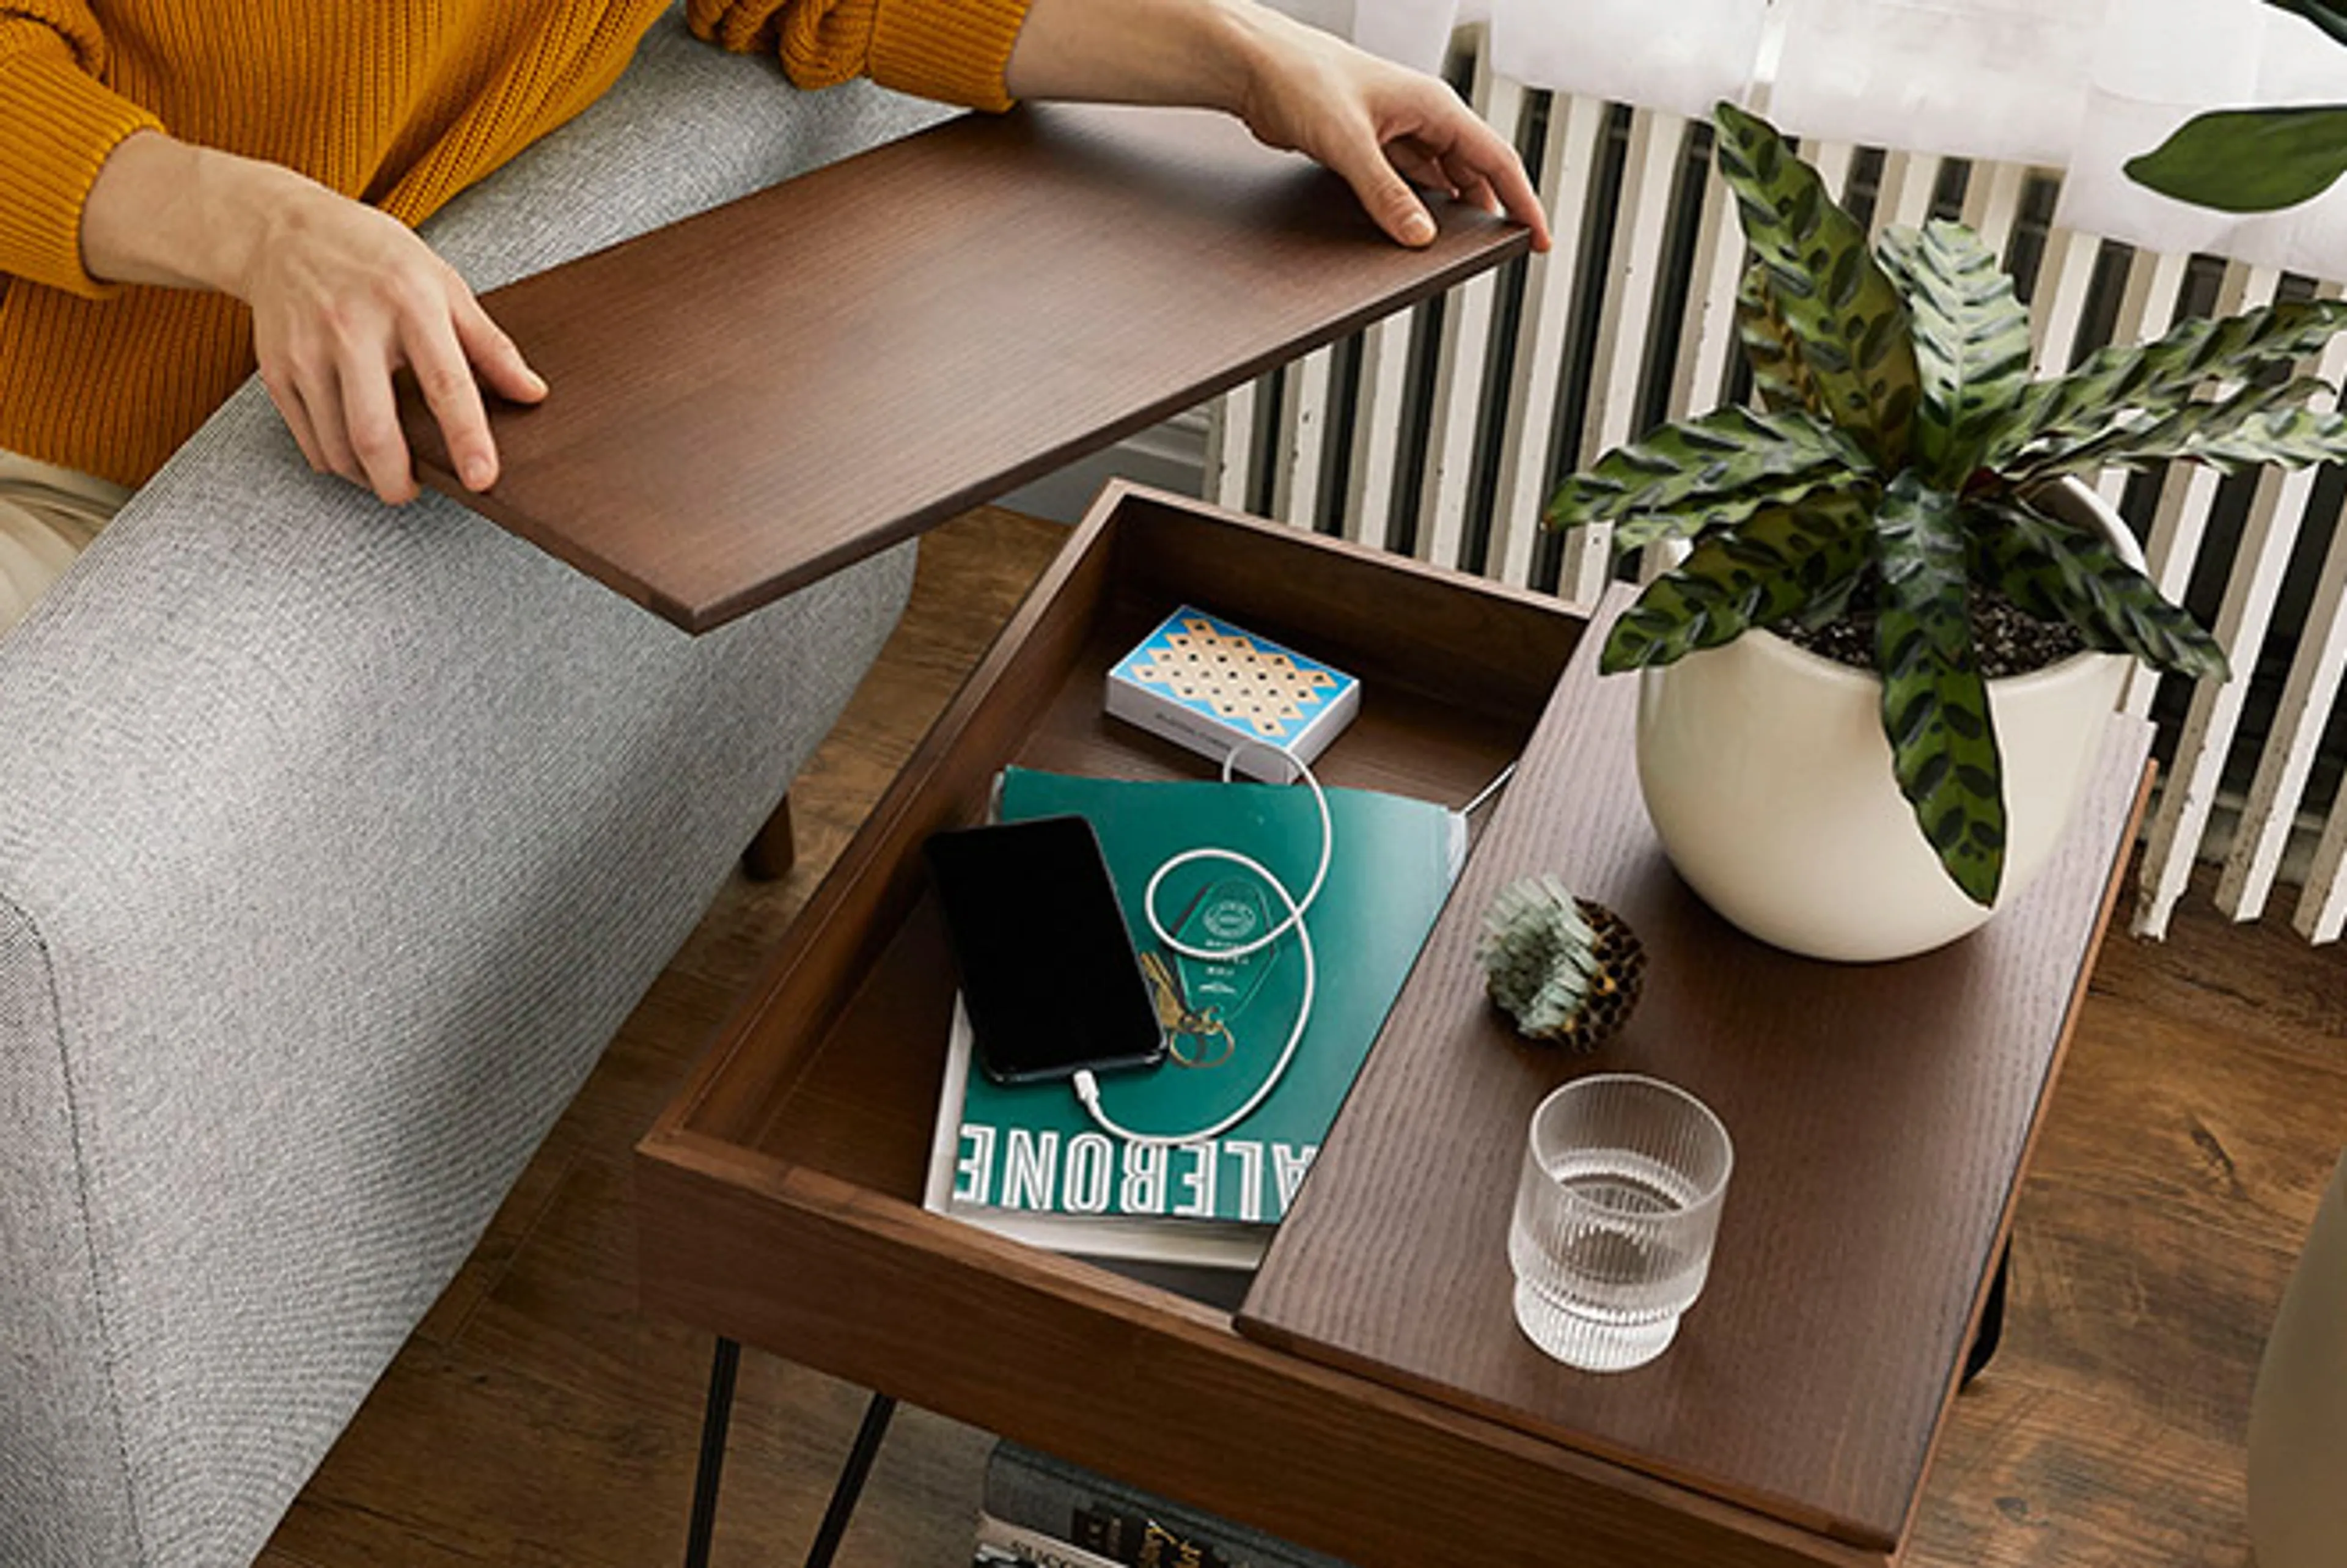 Carta coffee table in walnut showing book and phone inside storage table.